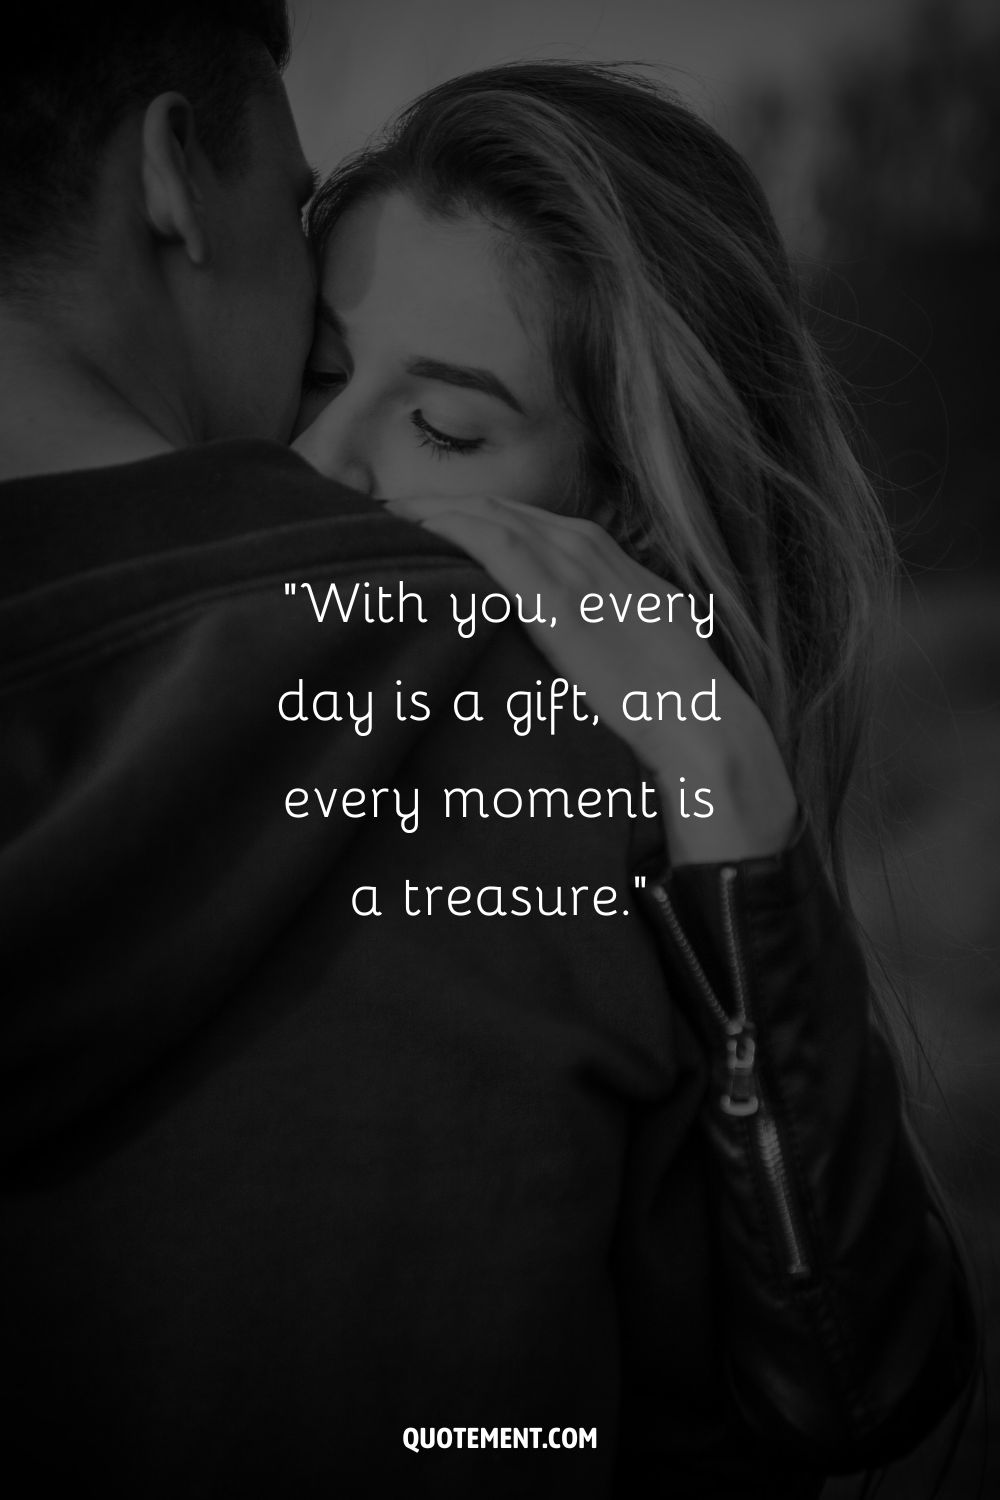 With you, every day is a gift, and every moment is a treasure